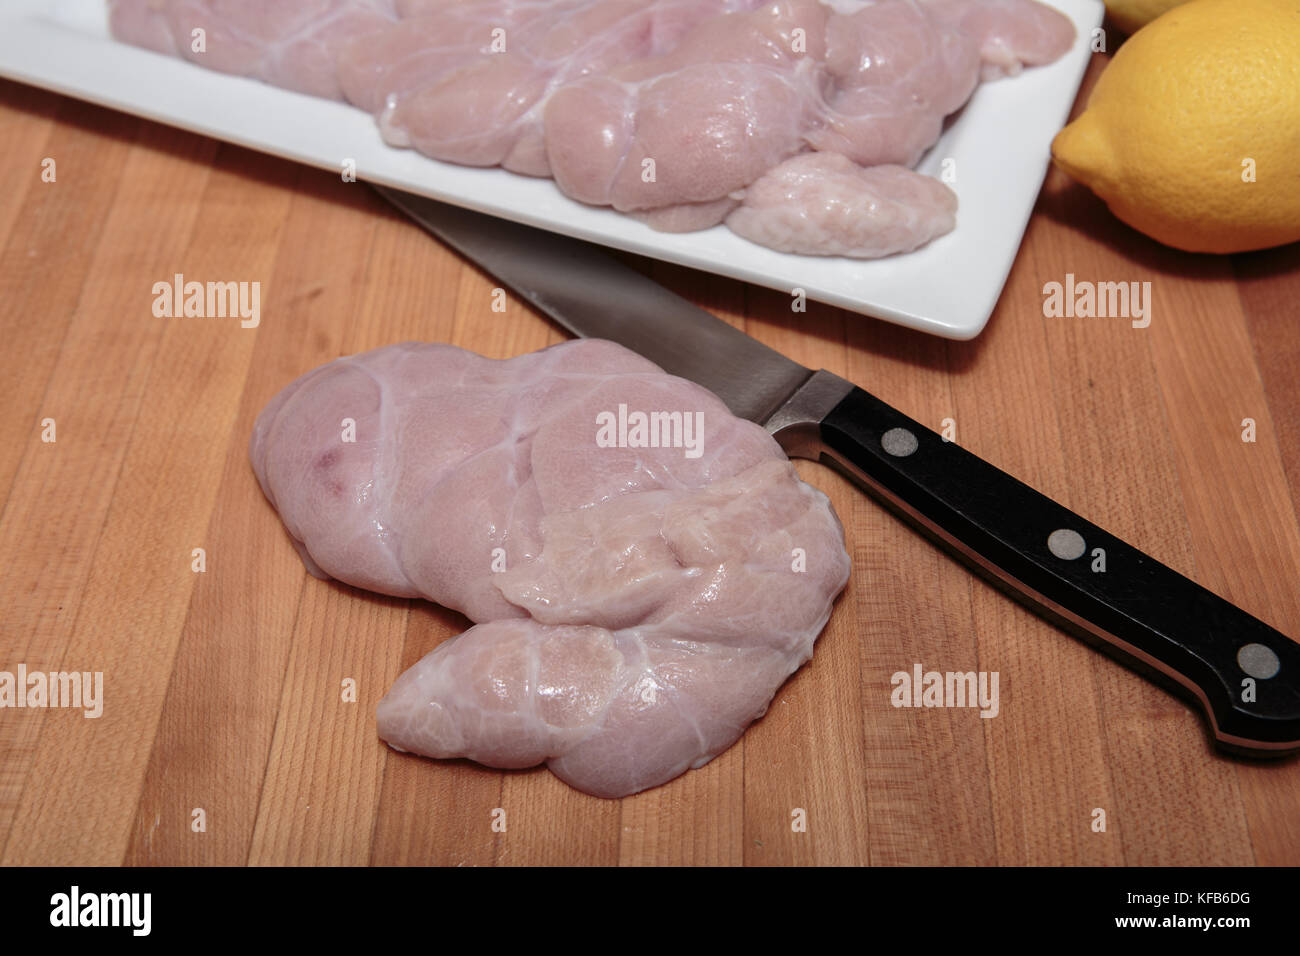 Raw Calfs sweetbreads being prepared in a kitchen on a wooden cutting board Stock Photo